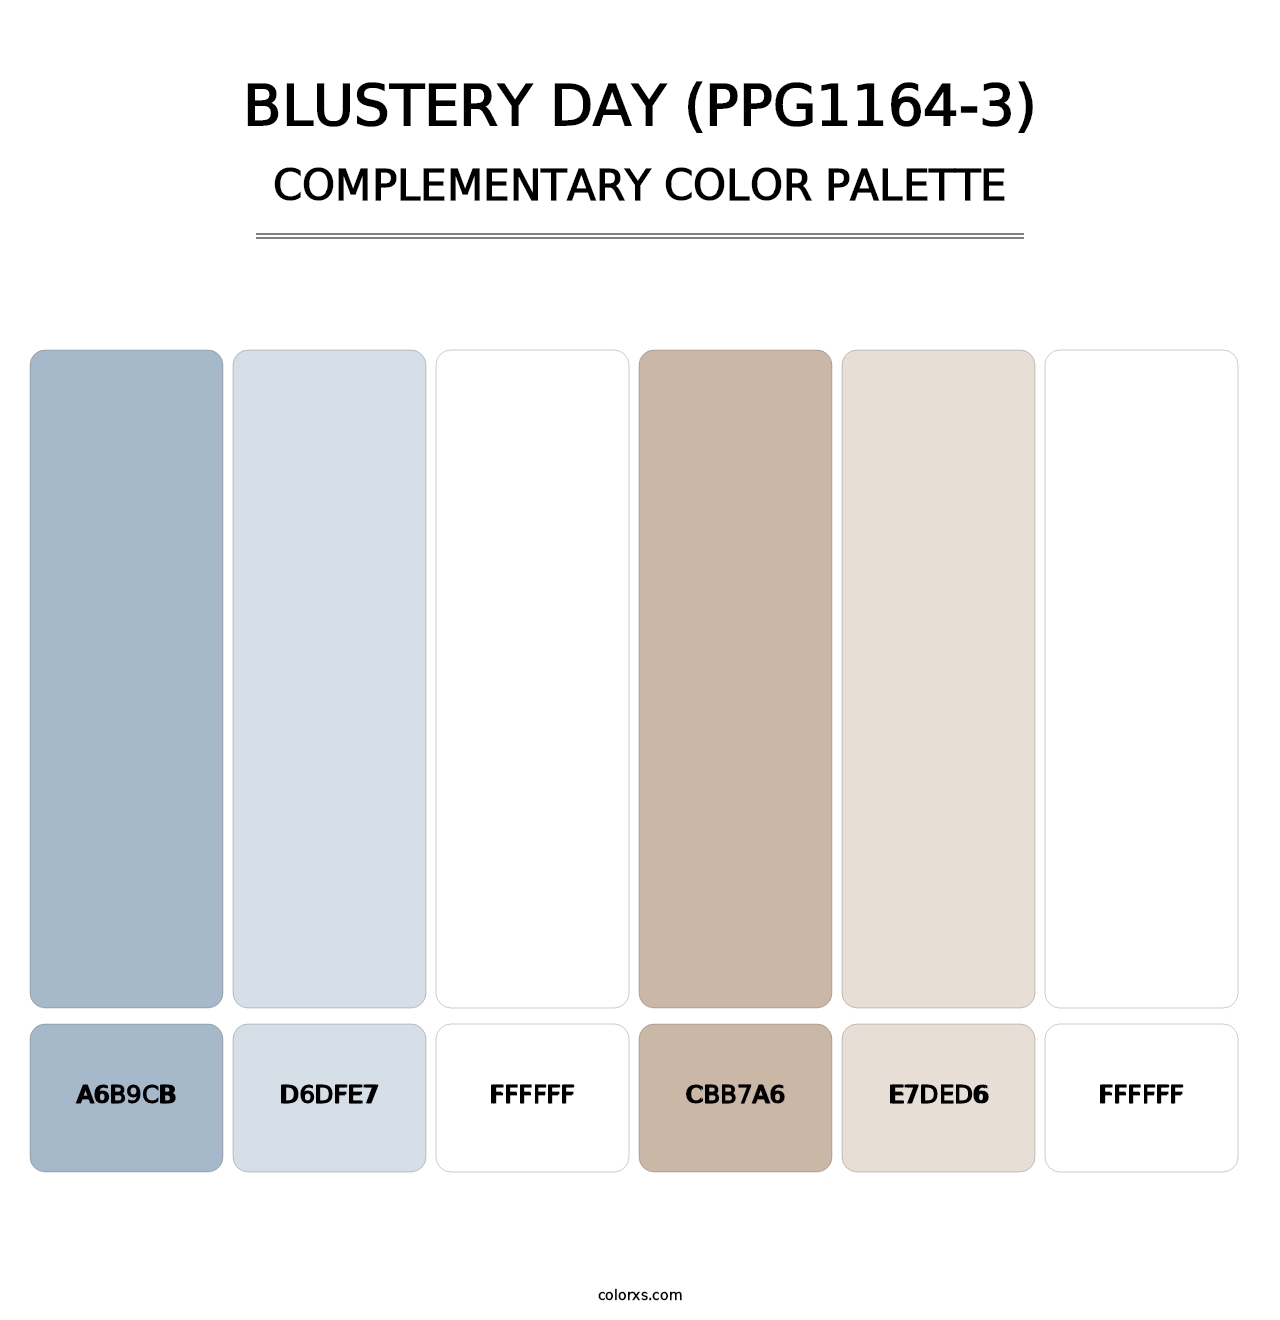 Blustery Day (PPG1164-3) - Complementary Color Palette